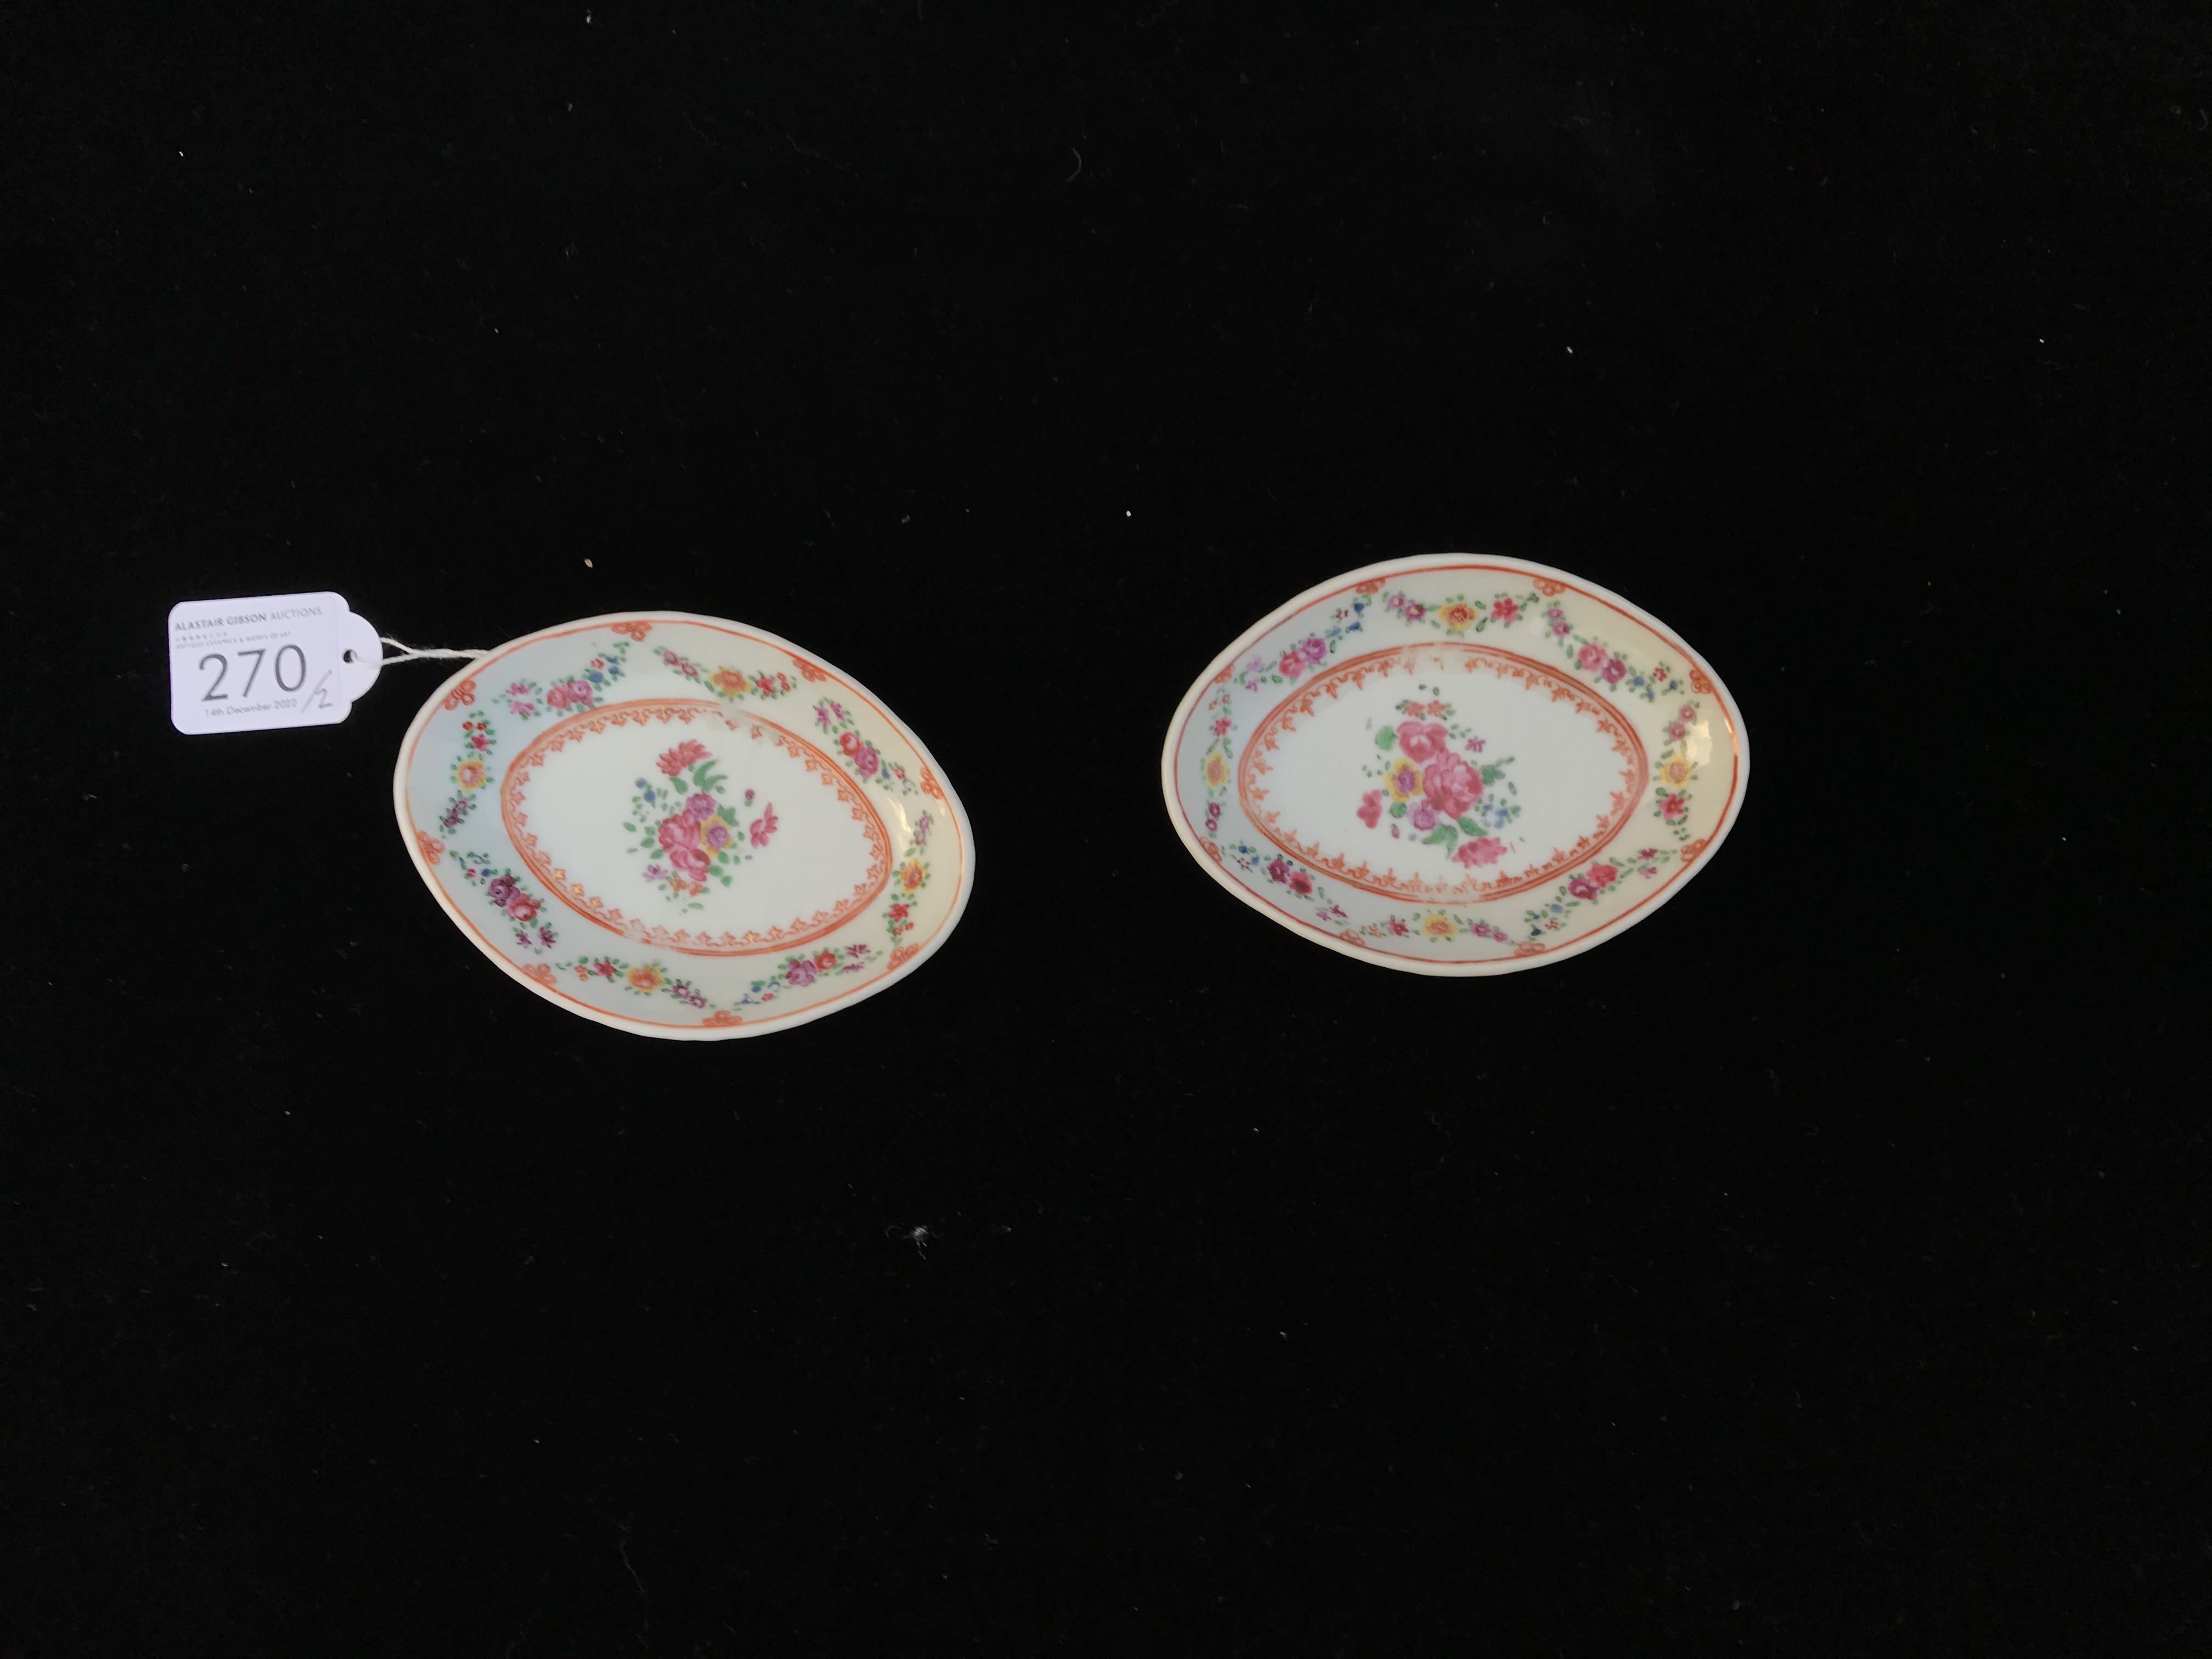 A PAIR OF CHINESE EXPORT ‘FAMILLE-ROSE’ PORCELAIN SPOON TRAYS, QIANLONG PERIOD, 1736 - 1795 - Image 2 of 4